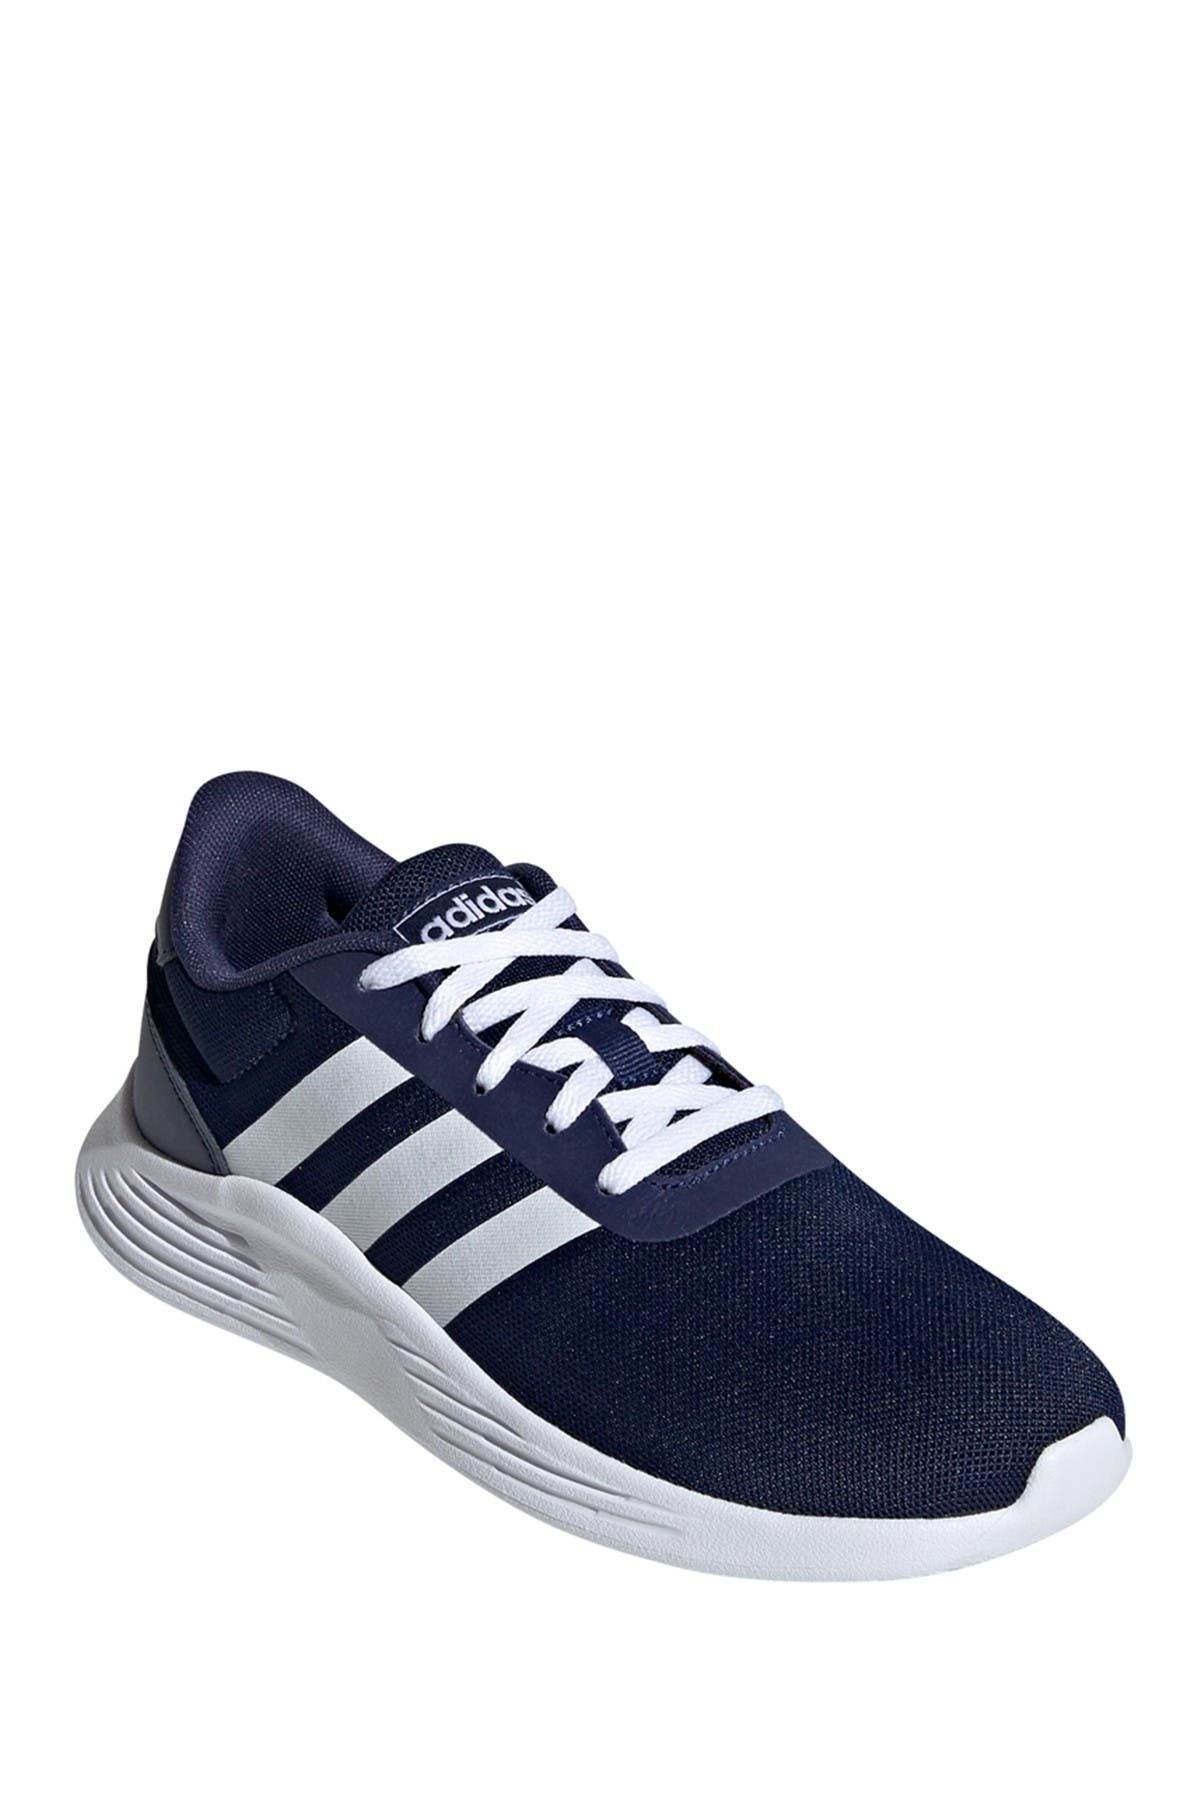 adidas lite racer toddler shoes